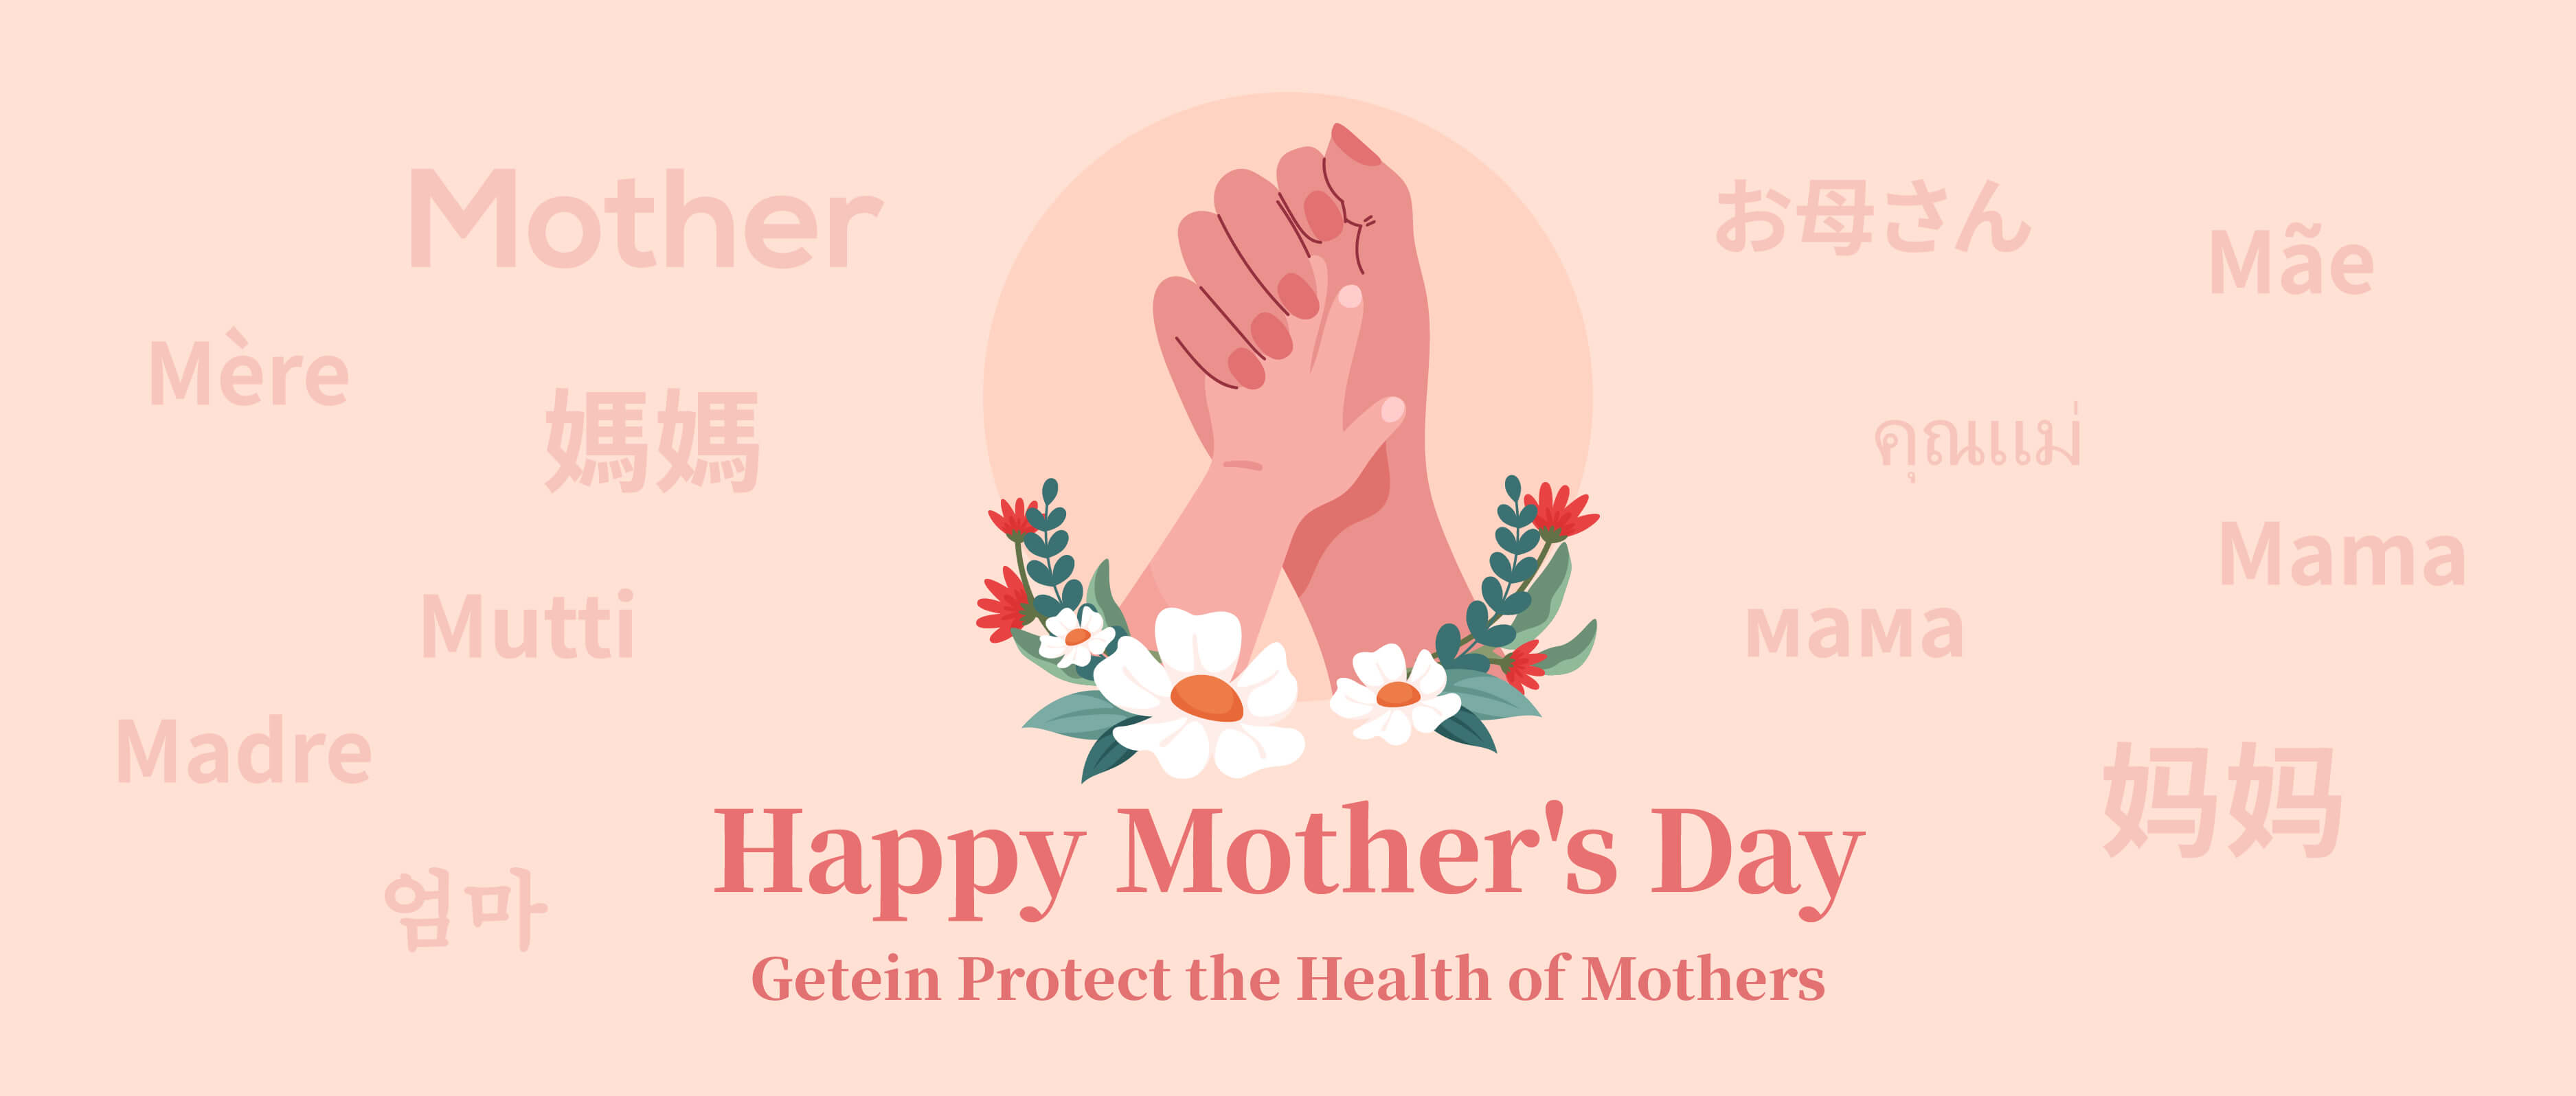 Happy Mother's Day-Getein Protect the Health of Mothers